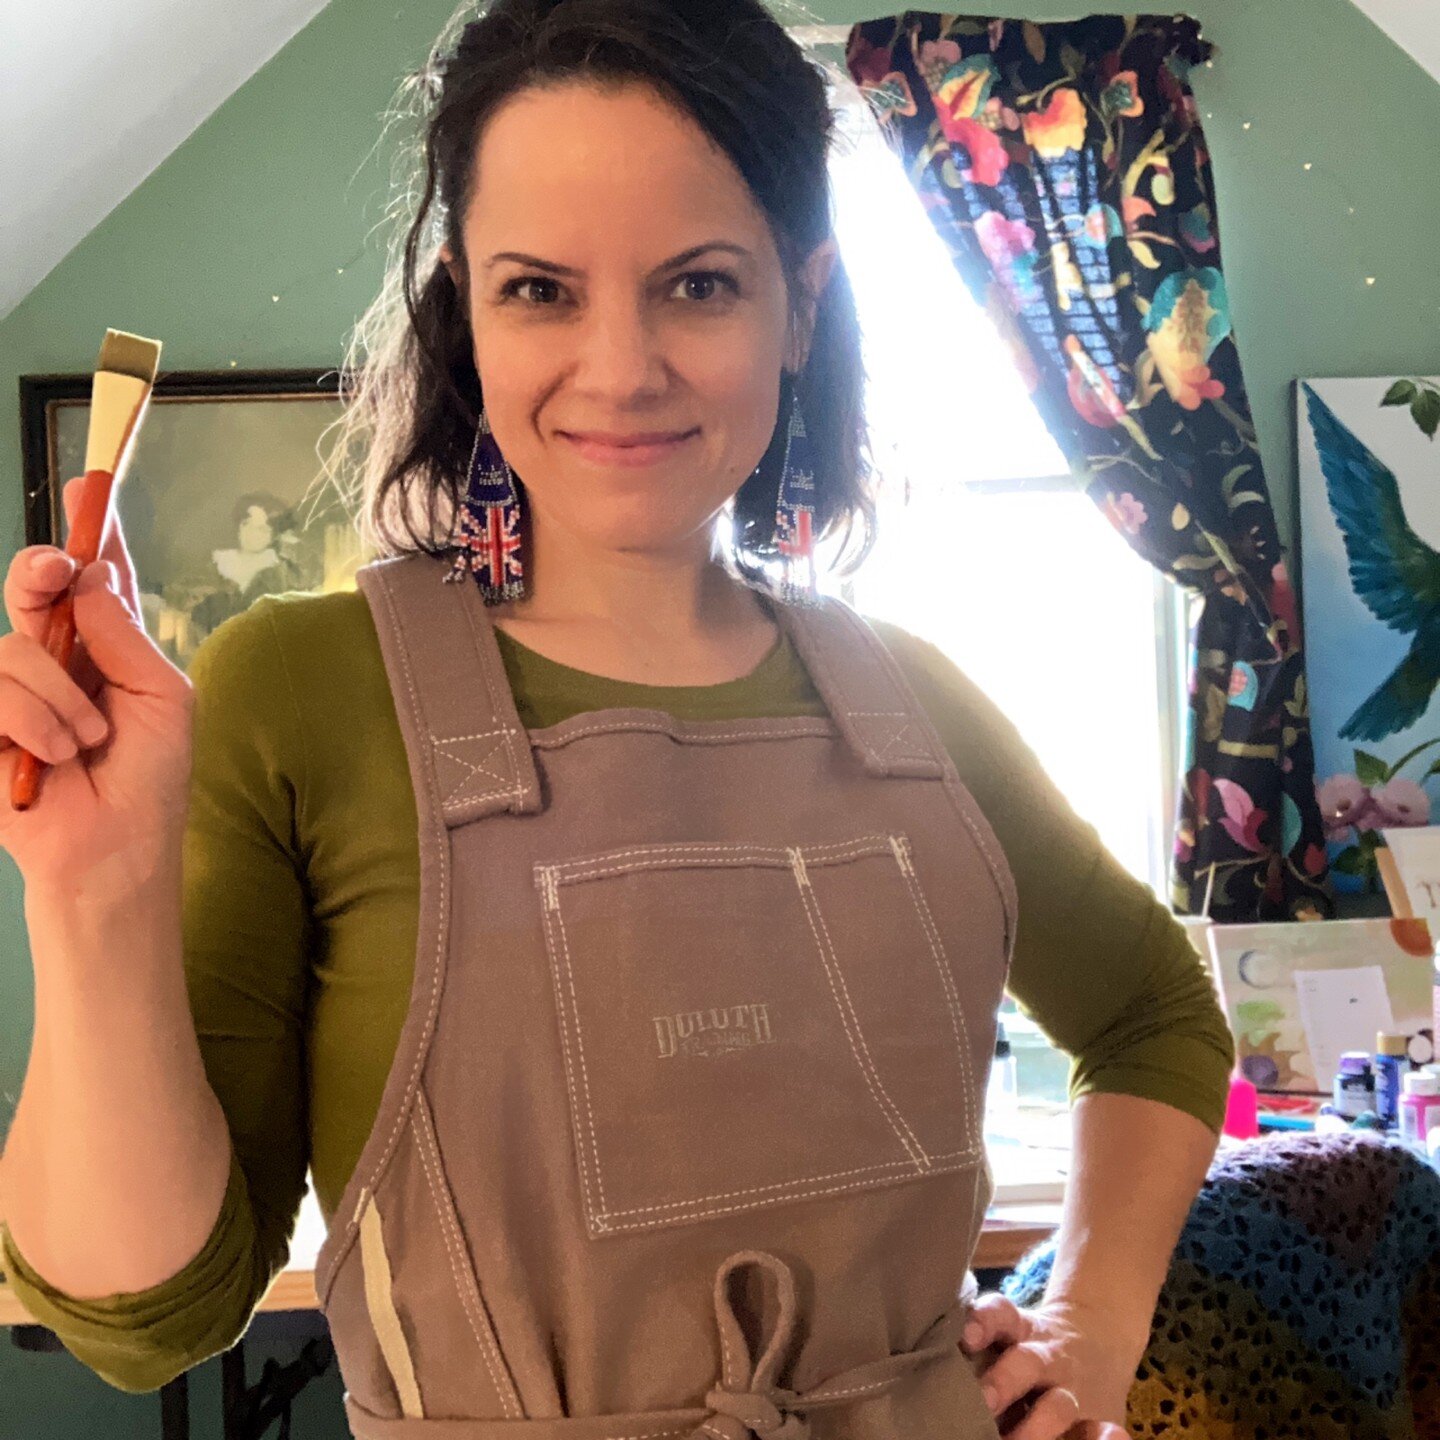 Armed for another painting session! Before I get messy with the acrylics, I like to put on my Duluth apron &ndash; it&rsquo;s heavy duty and super practical. 🎨 But first, I put on music and dance to get out of my head! Movement and music have become